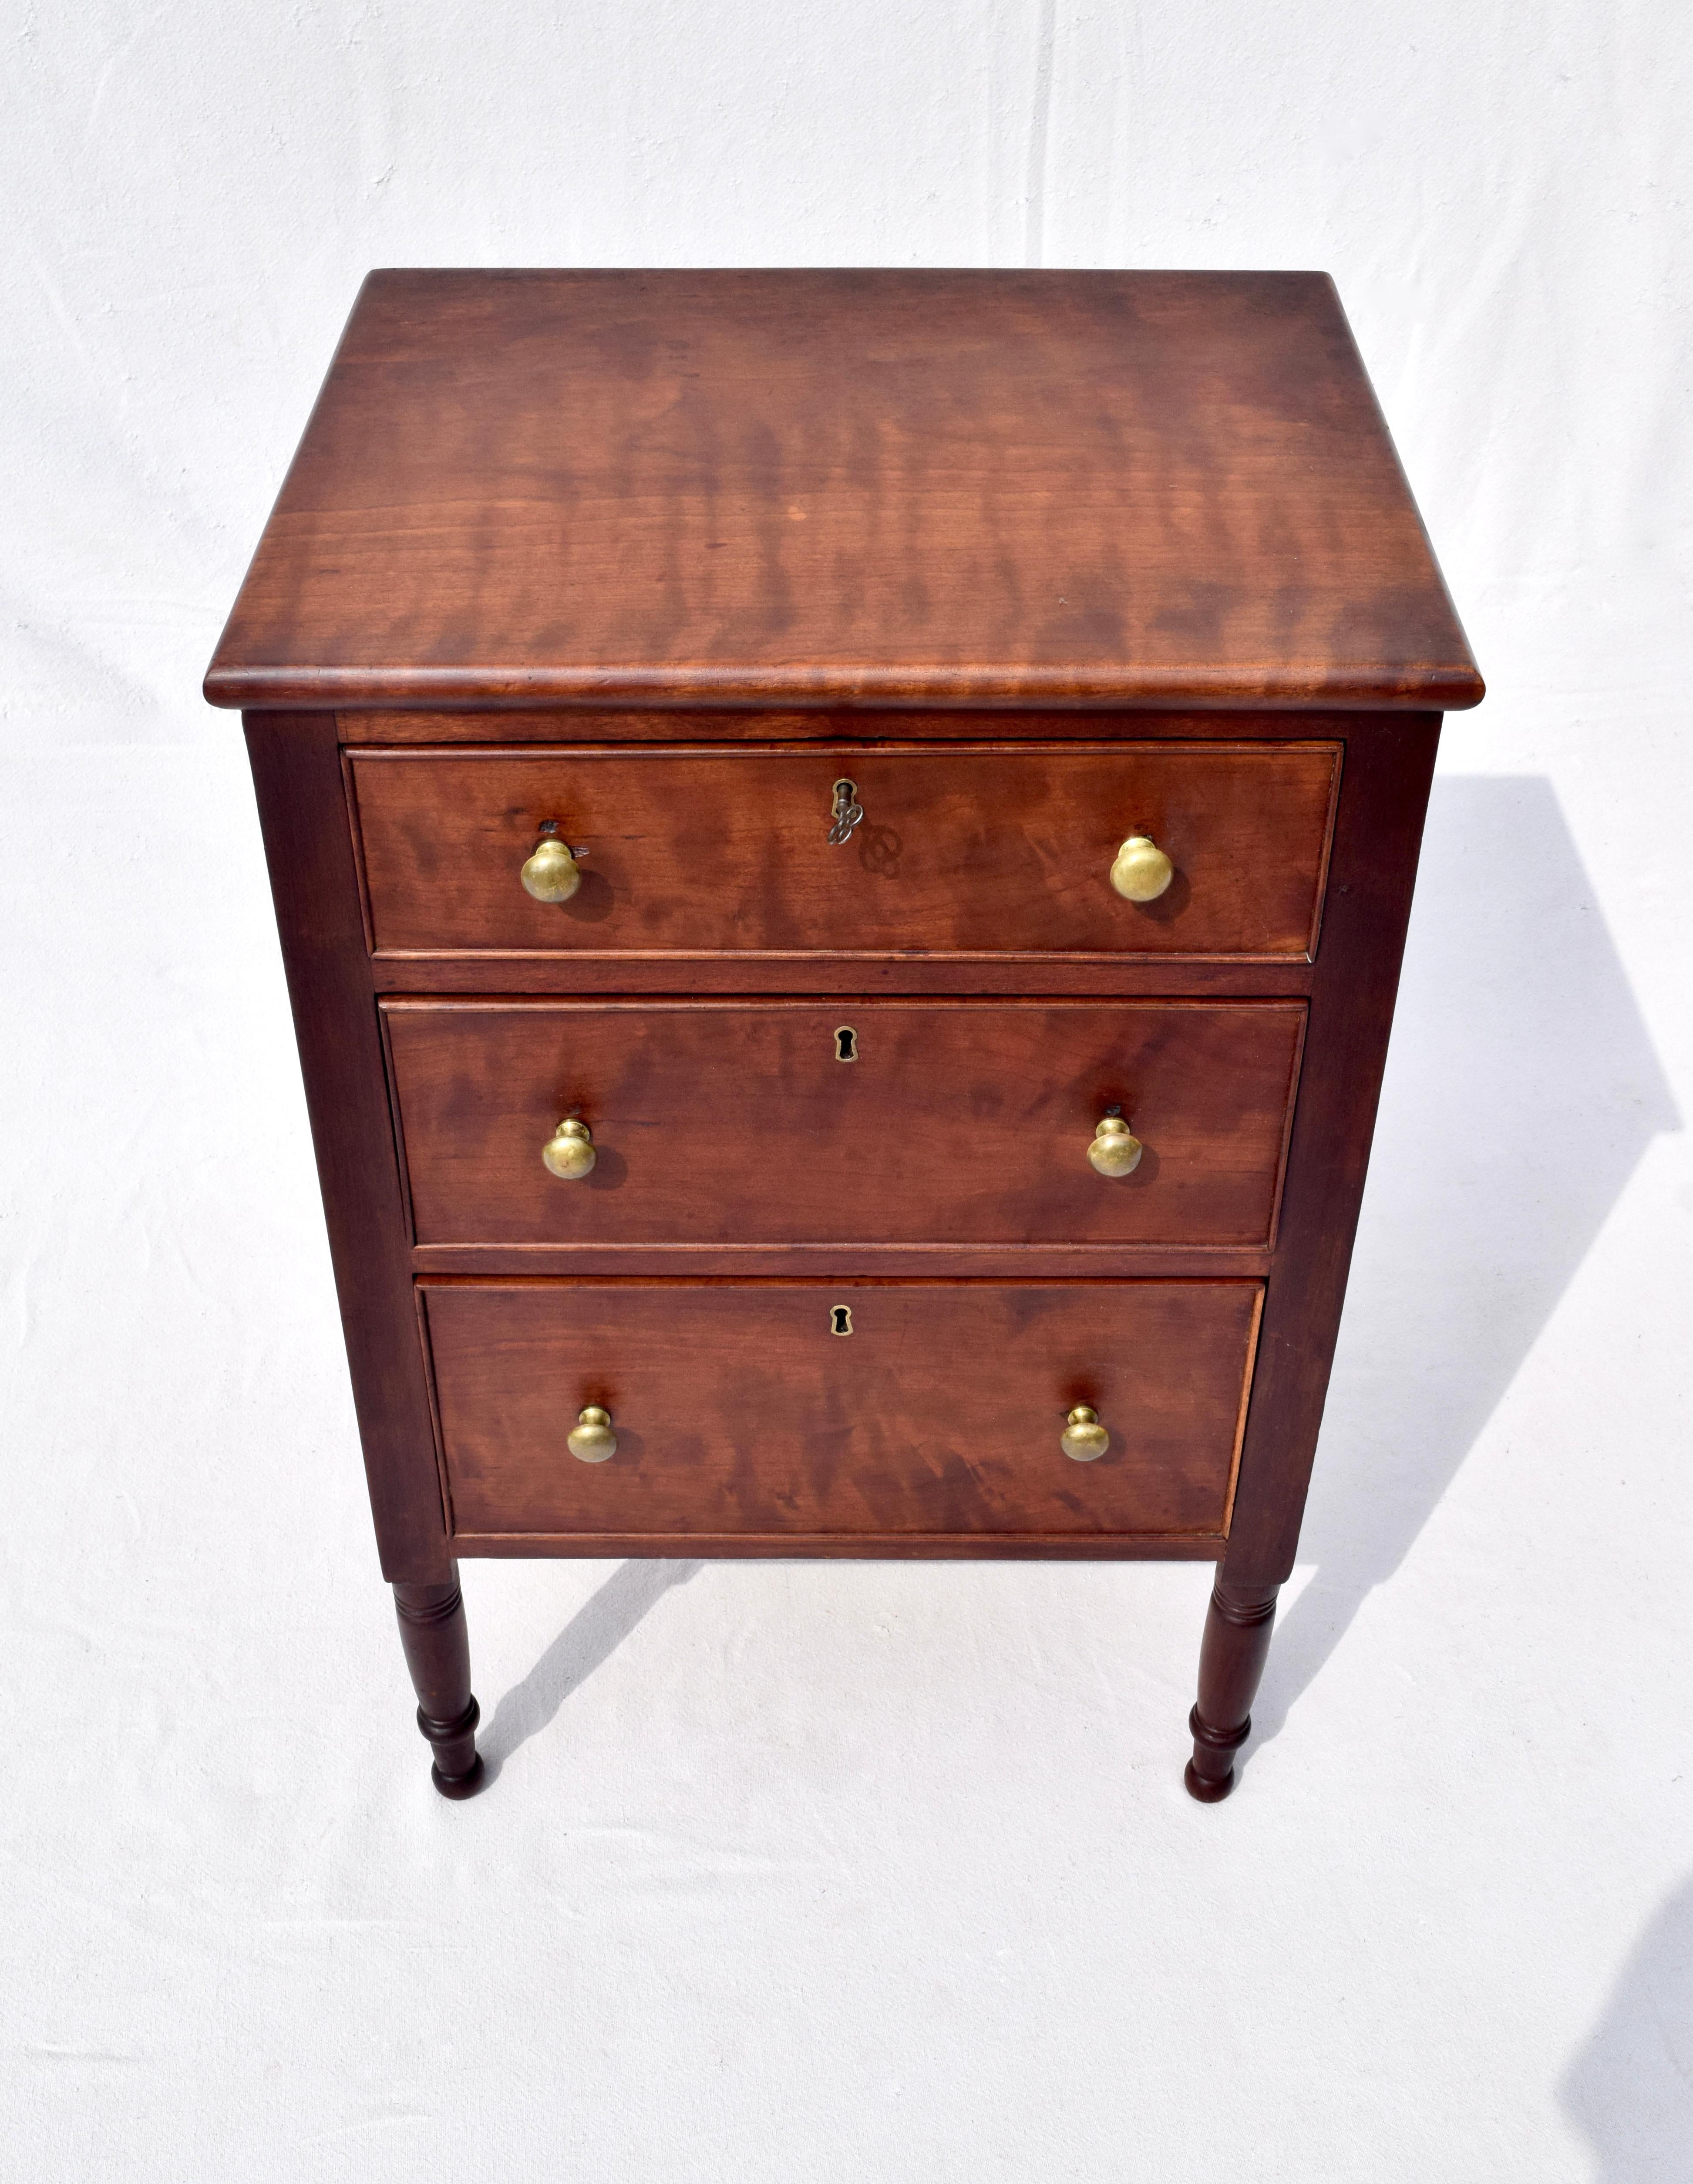 An early 19th c. Federal period Sheraton style chest of three dovetailed drawers with key. Refinished with original working locks. Unique in size & design for versatile uses & placement.